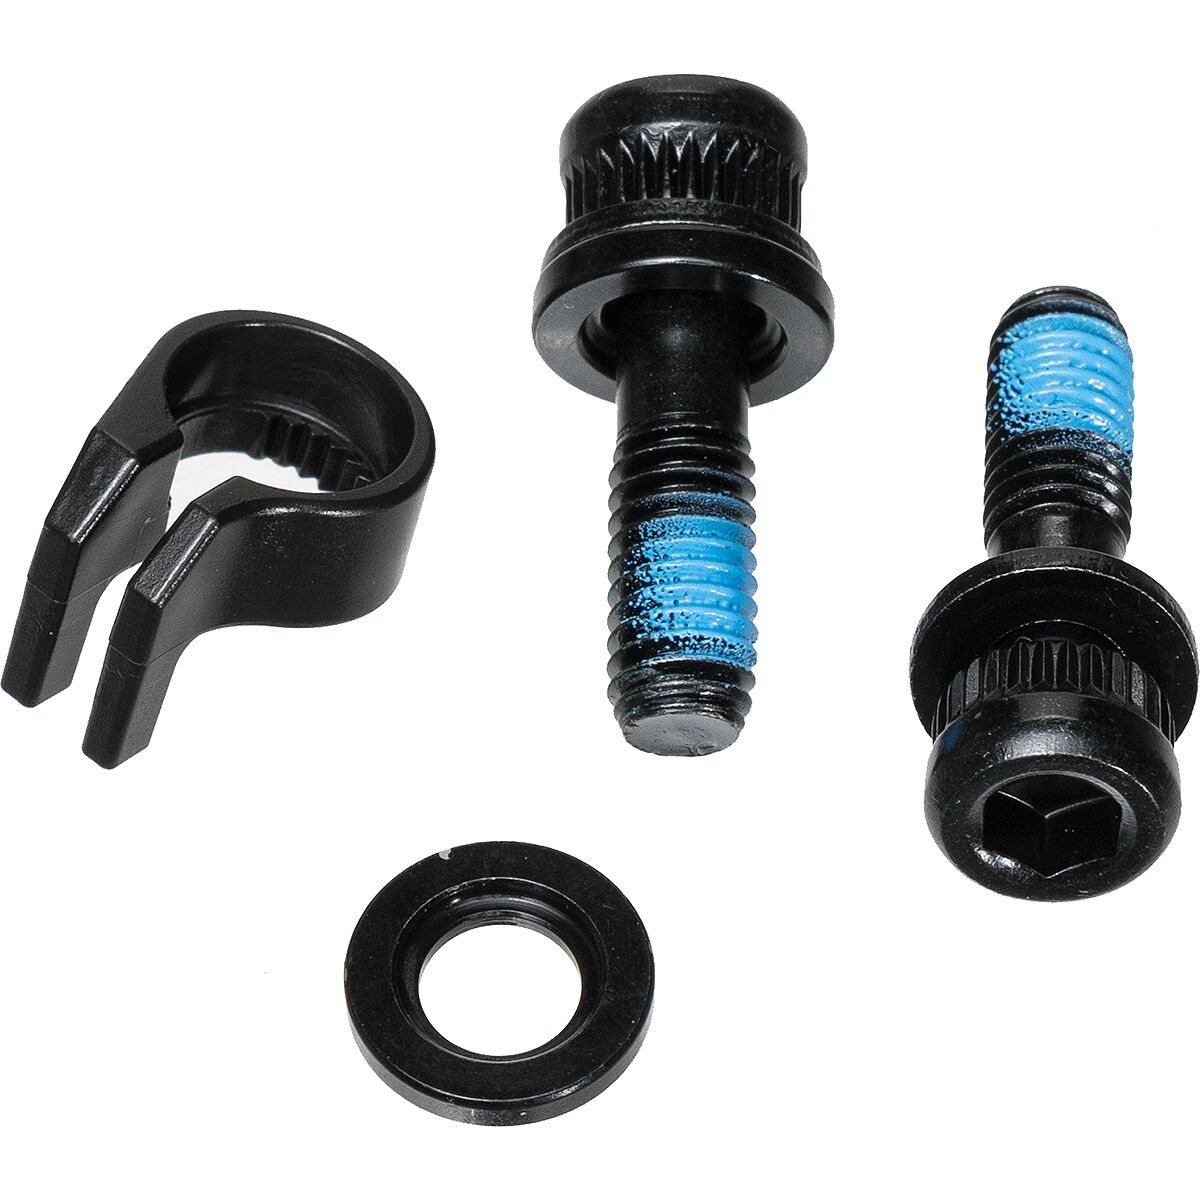 Disc Brake Adapters - In The Know Cycling